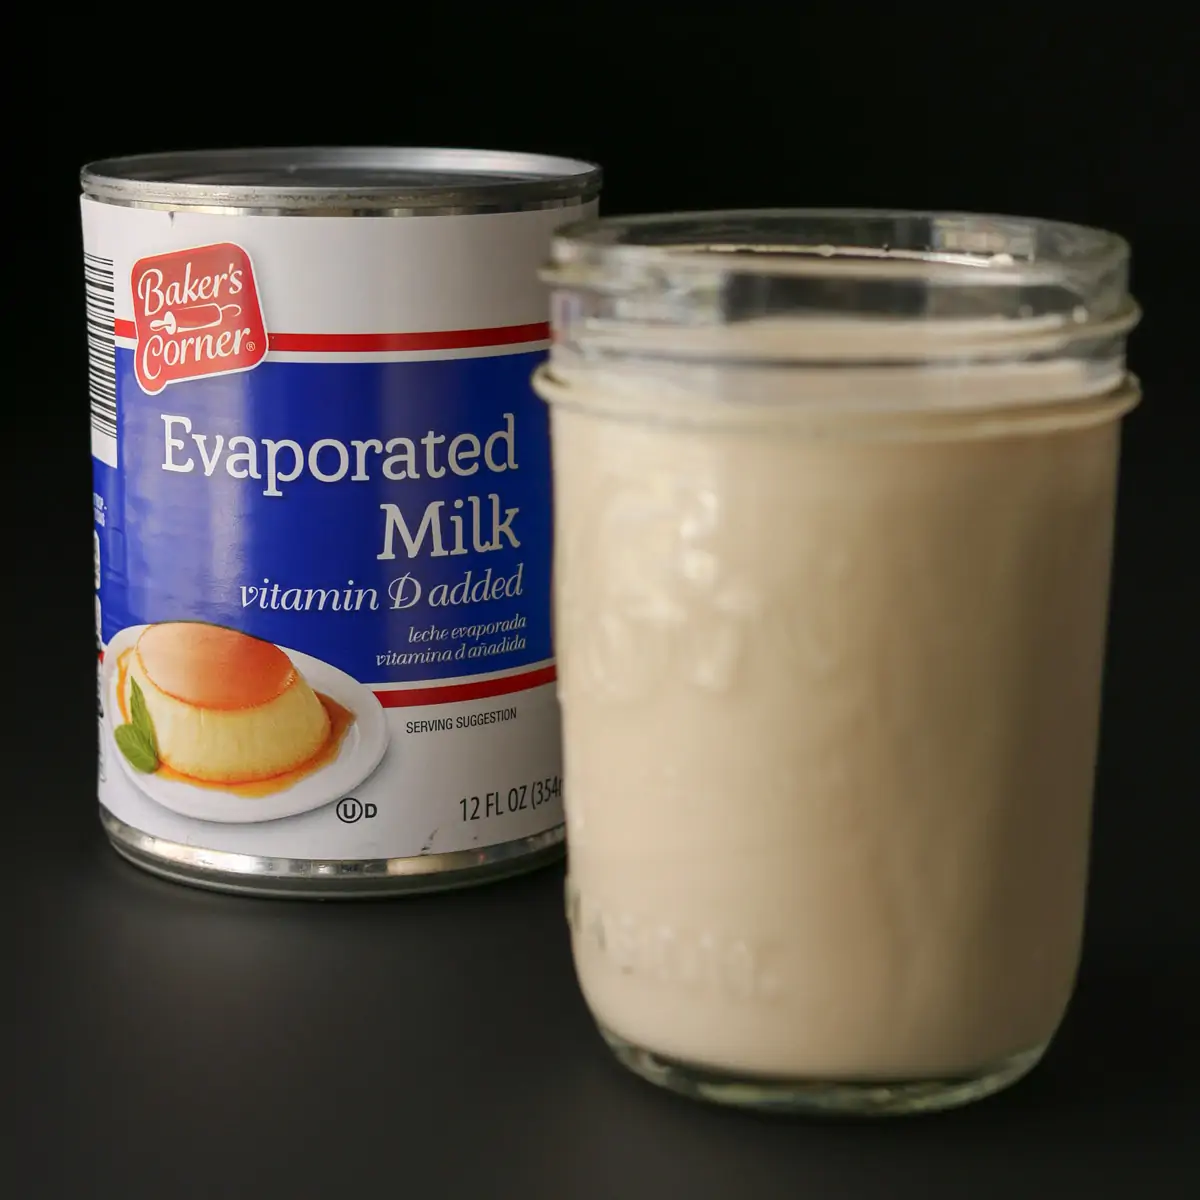 jar of evaporated milk next to can of ALDI evaporated milk on a black background.